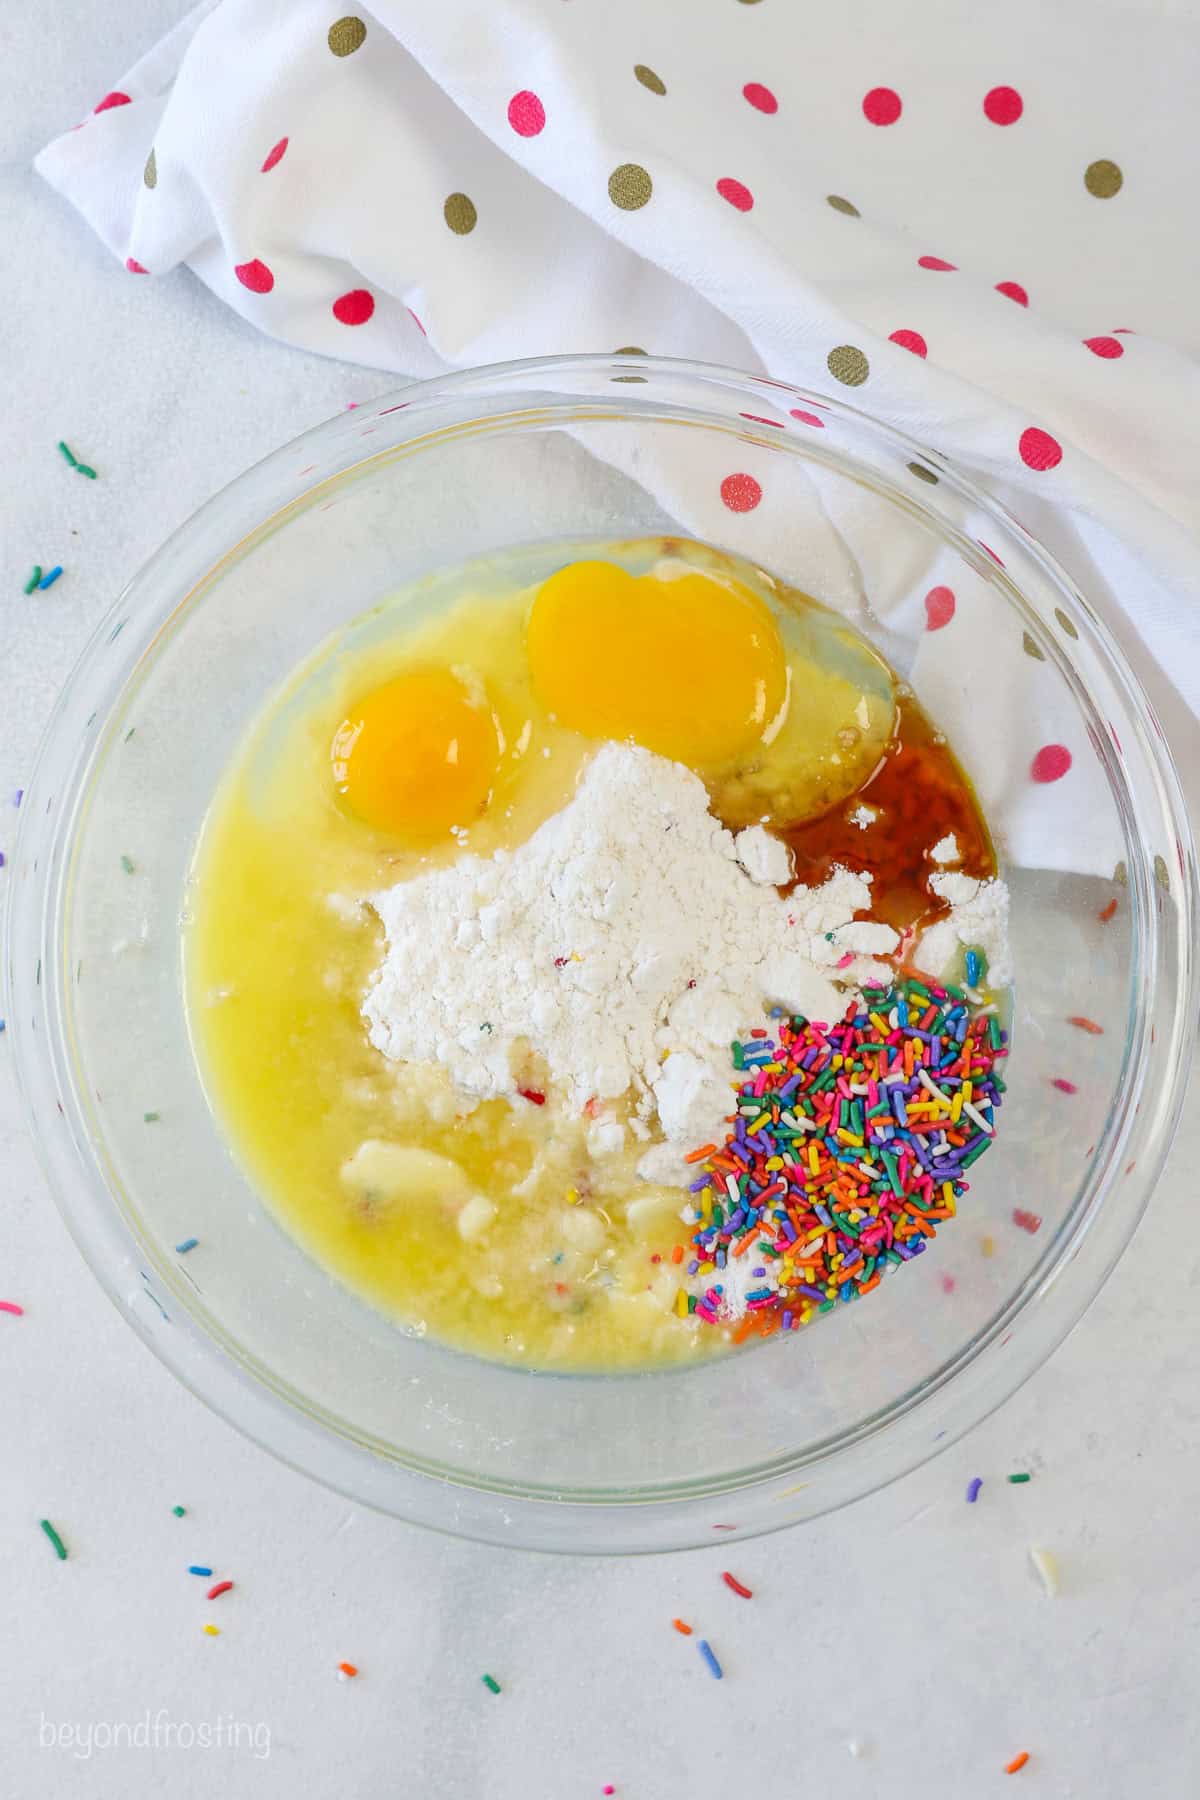 Funfetti cookie dough ingredients combined in a glass mixing bowl.